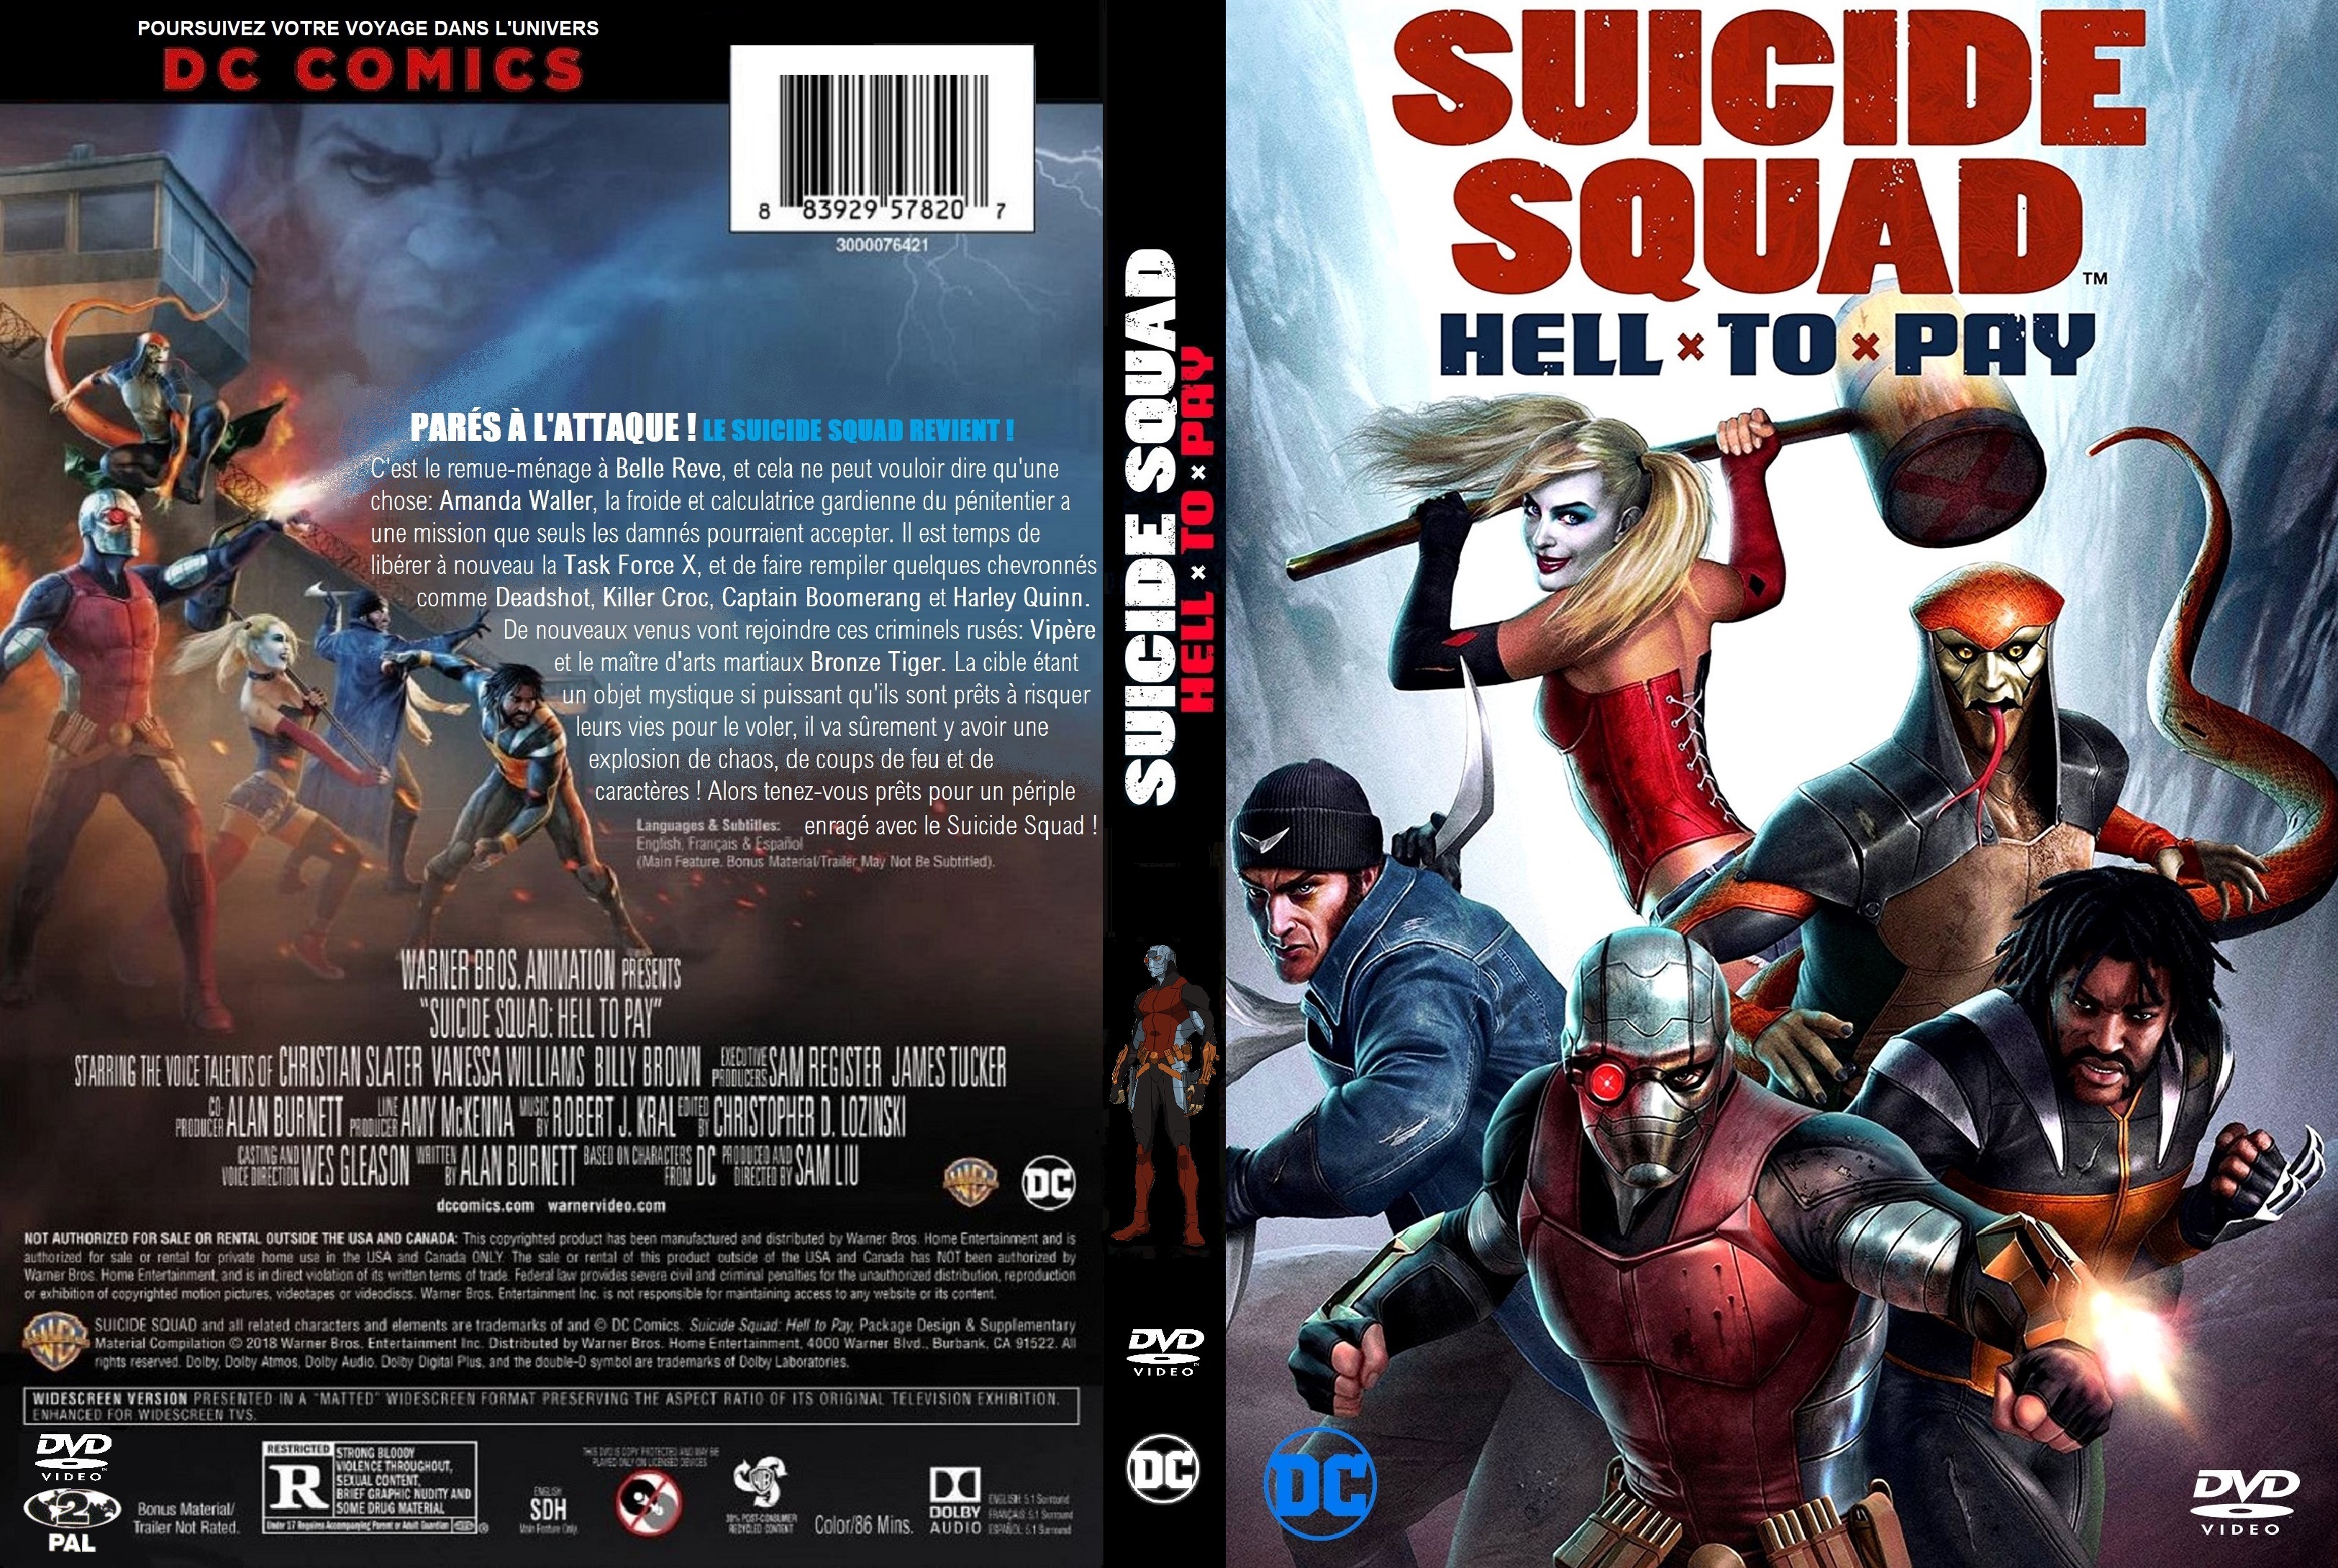 Jaquette DVD Suicide Squad Hell To Pay custom